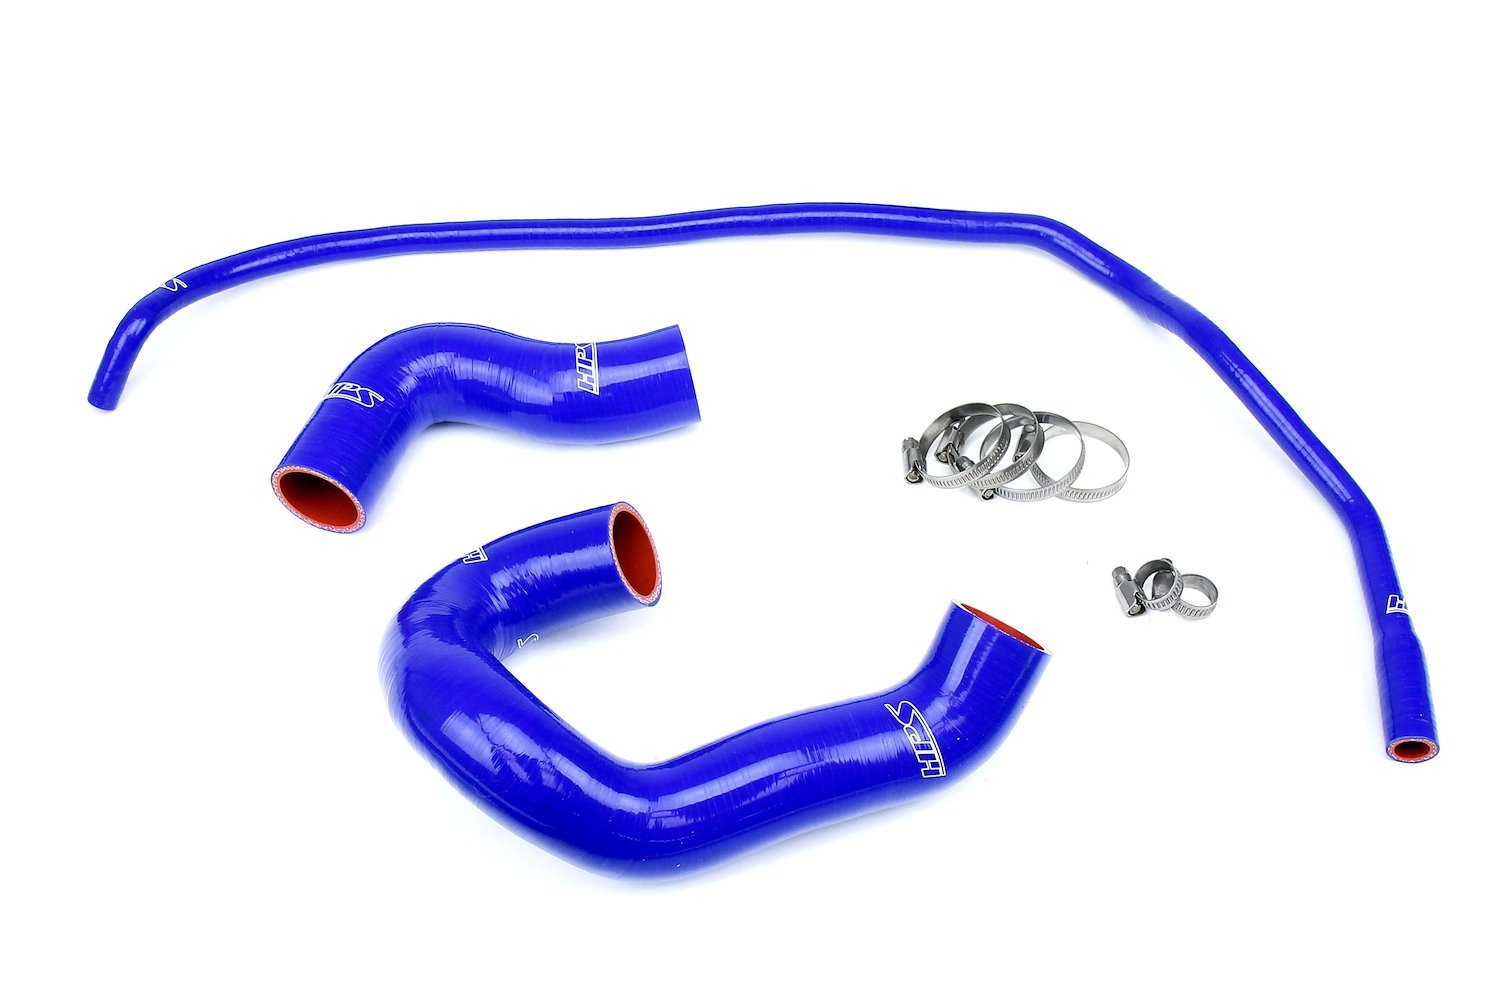 57-2160-BLUE Radiator Hose Kit, 3-Ply Reinforced Silicone, Replaces Rubber Radiator & Coolant Tank Hoses